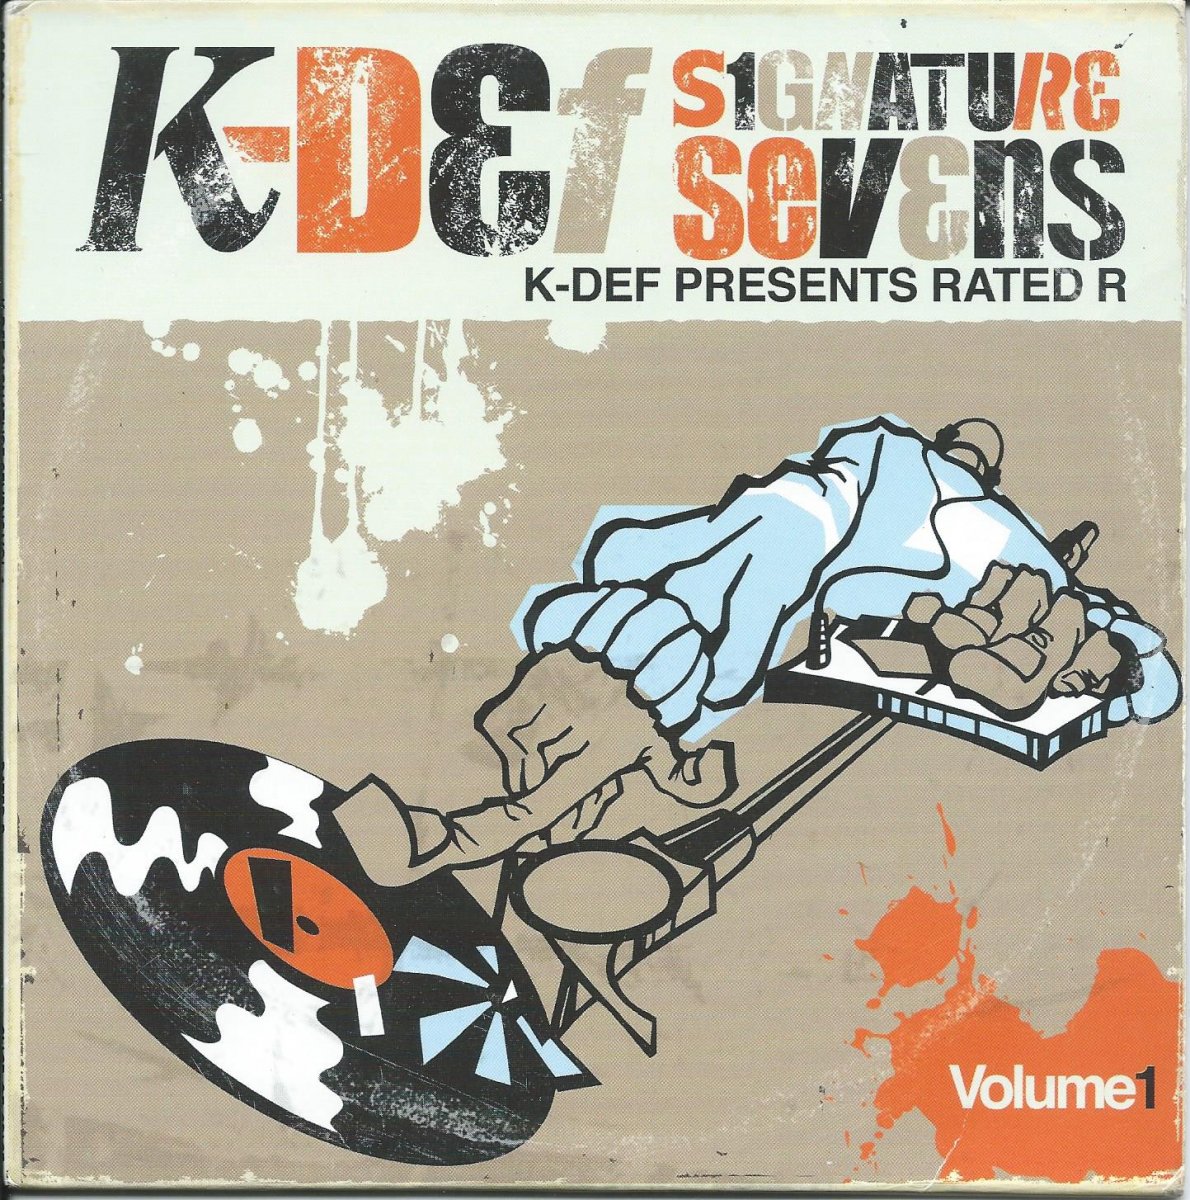 K-DEF ‎/ WHAT GOES UP (SIGNATURE SEVENS VOL.1 - K-DEF PRESENTS RATED R) (7